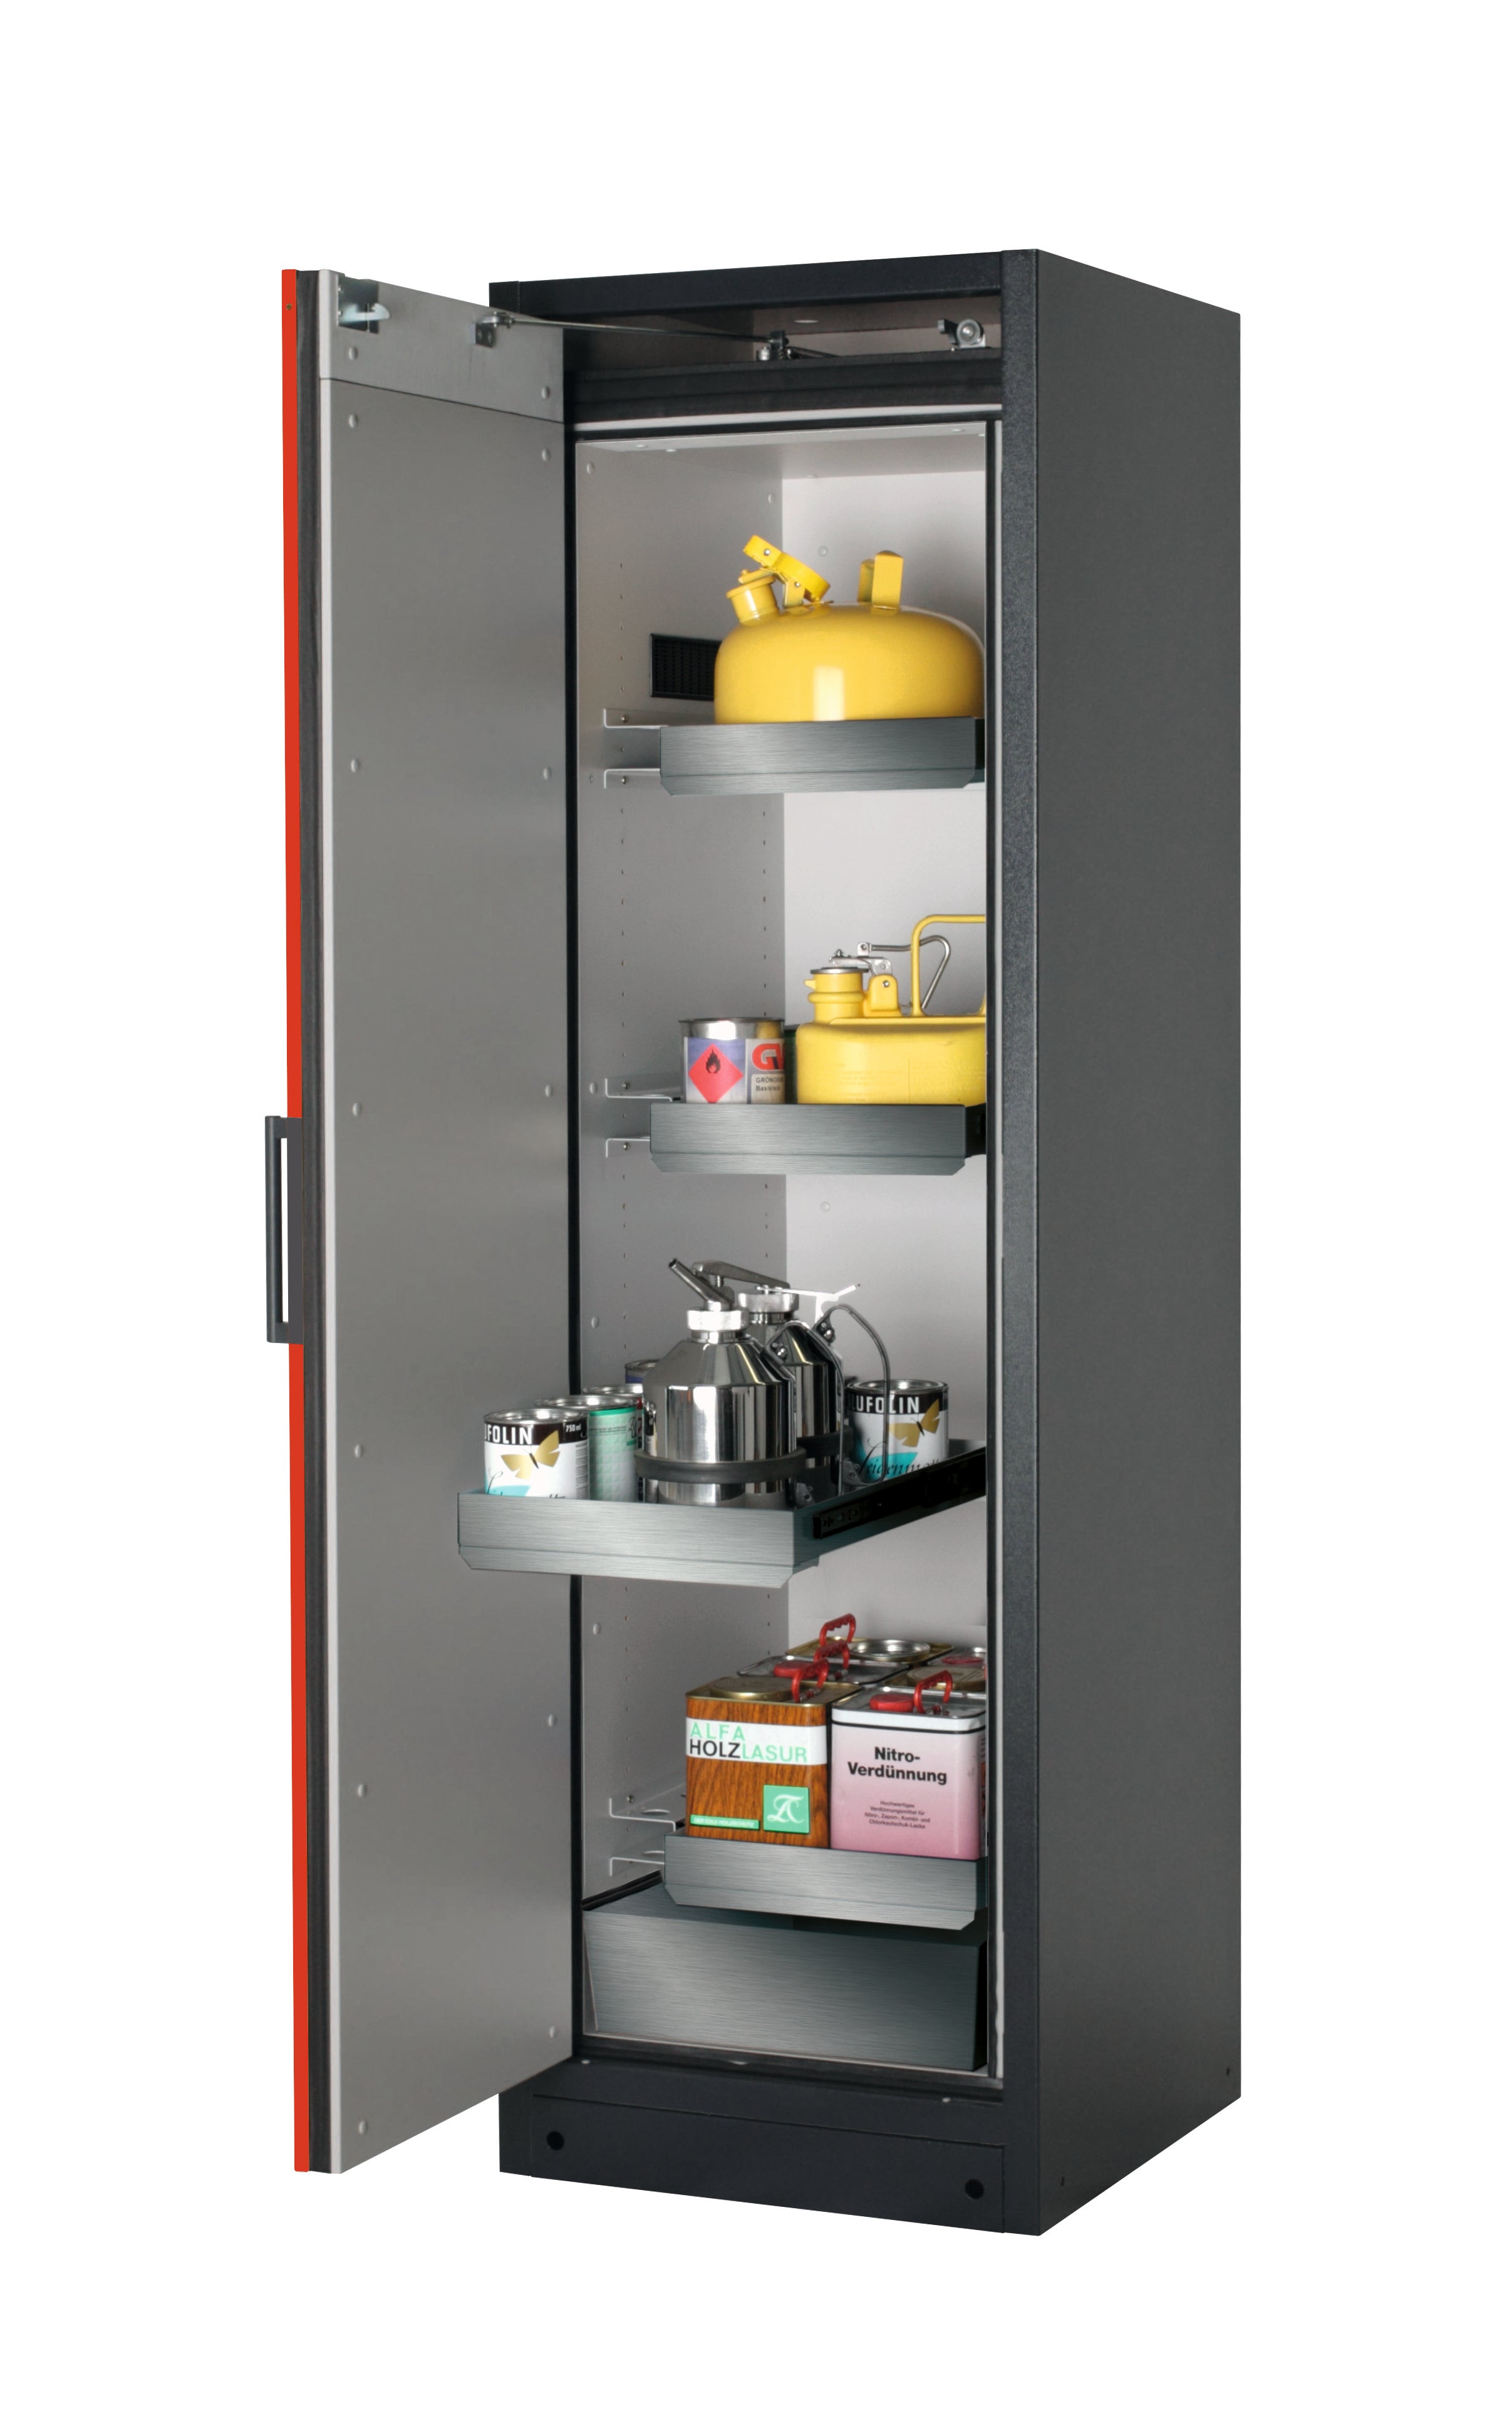 Type 90 safety storage cabinet Q-PEGASUS-90 model Q90.195.060.WDAC in traffic red RAL 3020 with 3x drawer (standard) (stainless steel 1.4301),